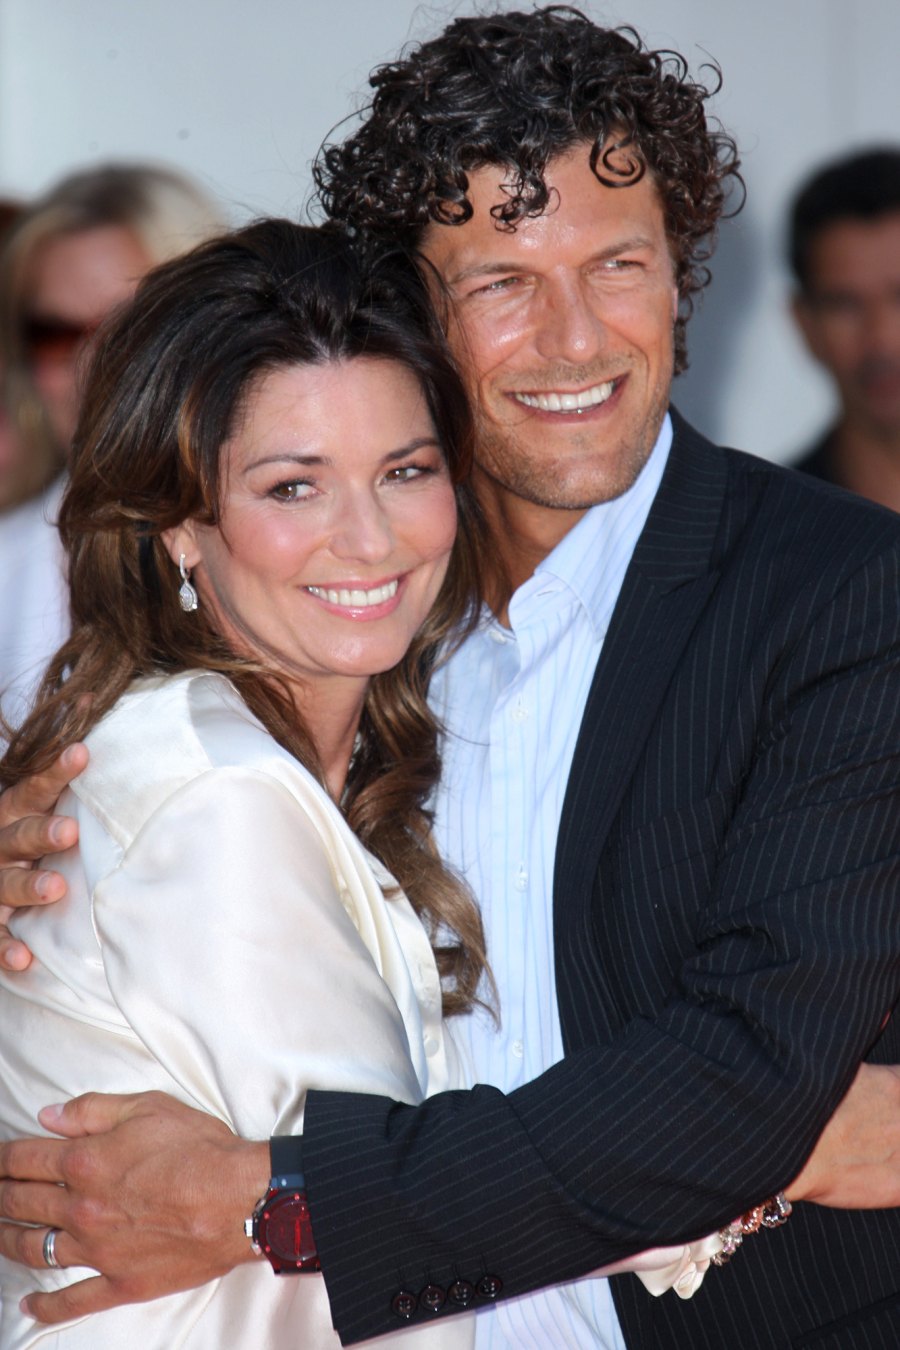 Shania Twain and Frederic Thiebaud's Relationship Timeline - 063 Shania Twain Honored With A Star On The Hollywood Walk Of Fame, Los Angeles, America - 02 Jun 2011